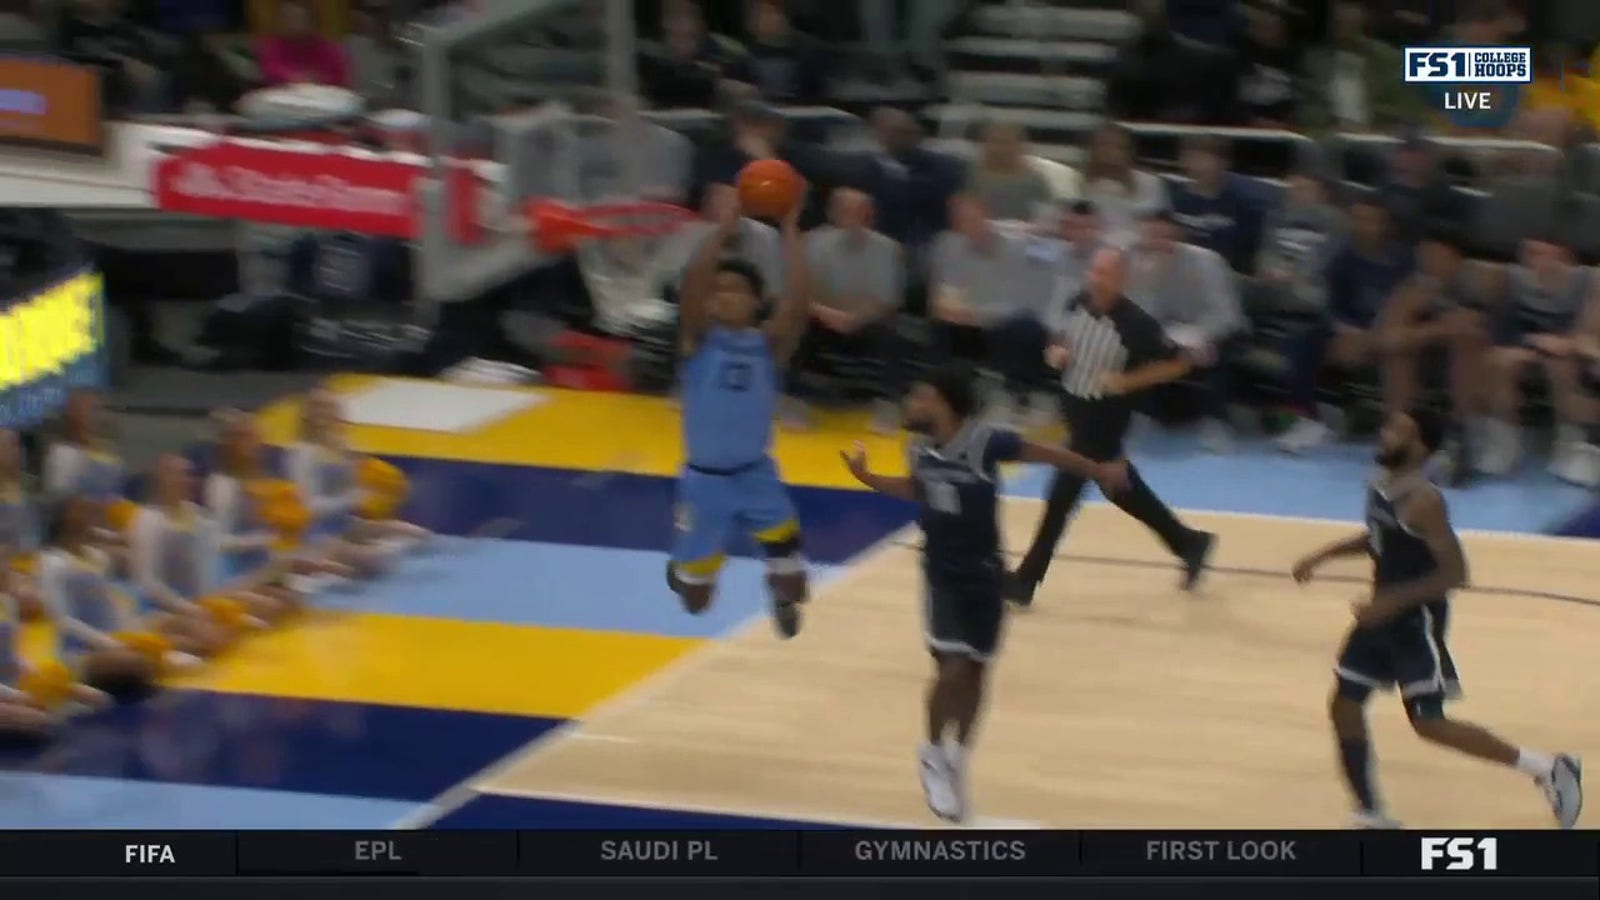 Tyler Kolek lobs it to Oso Ighodaro for a strong two-handed alley-oop to extend Marquette's lead over Georgetown